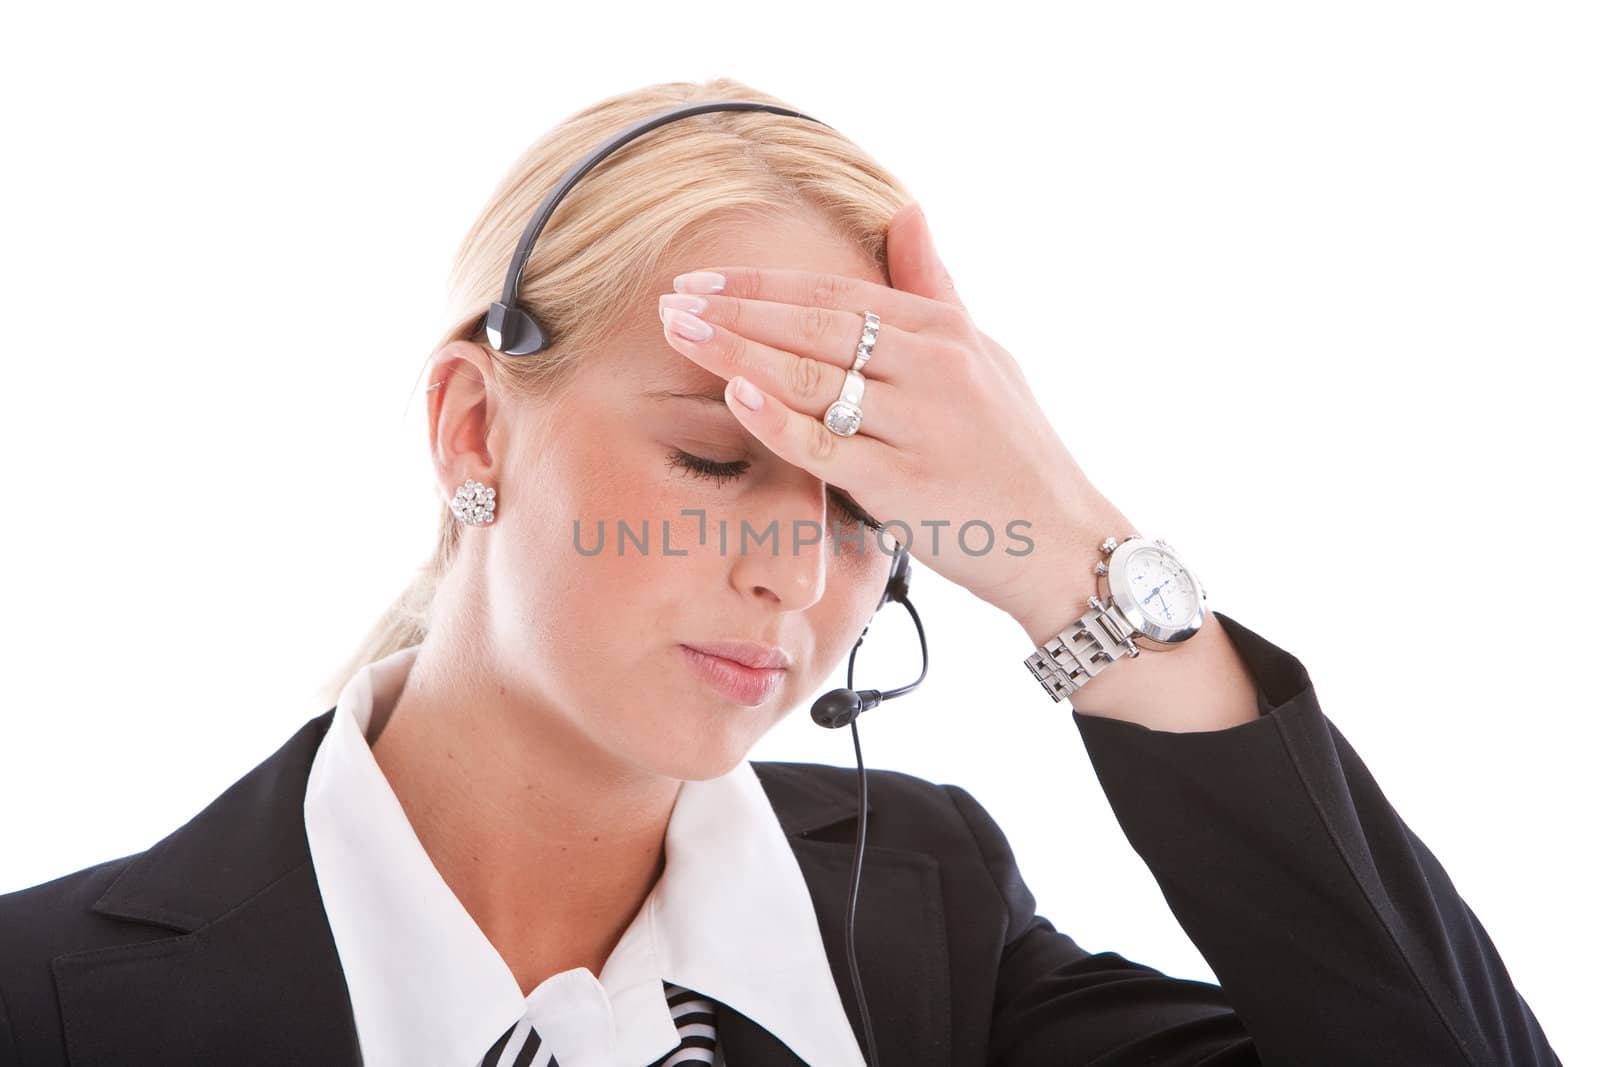 Receptionist with headset having a headache and reaching for her forehead